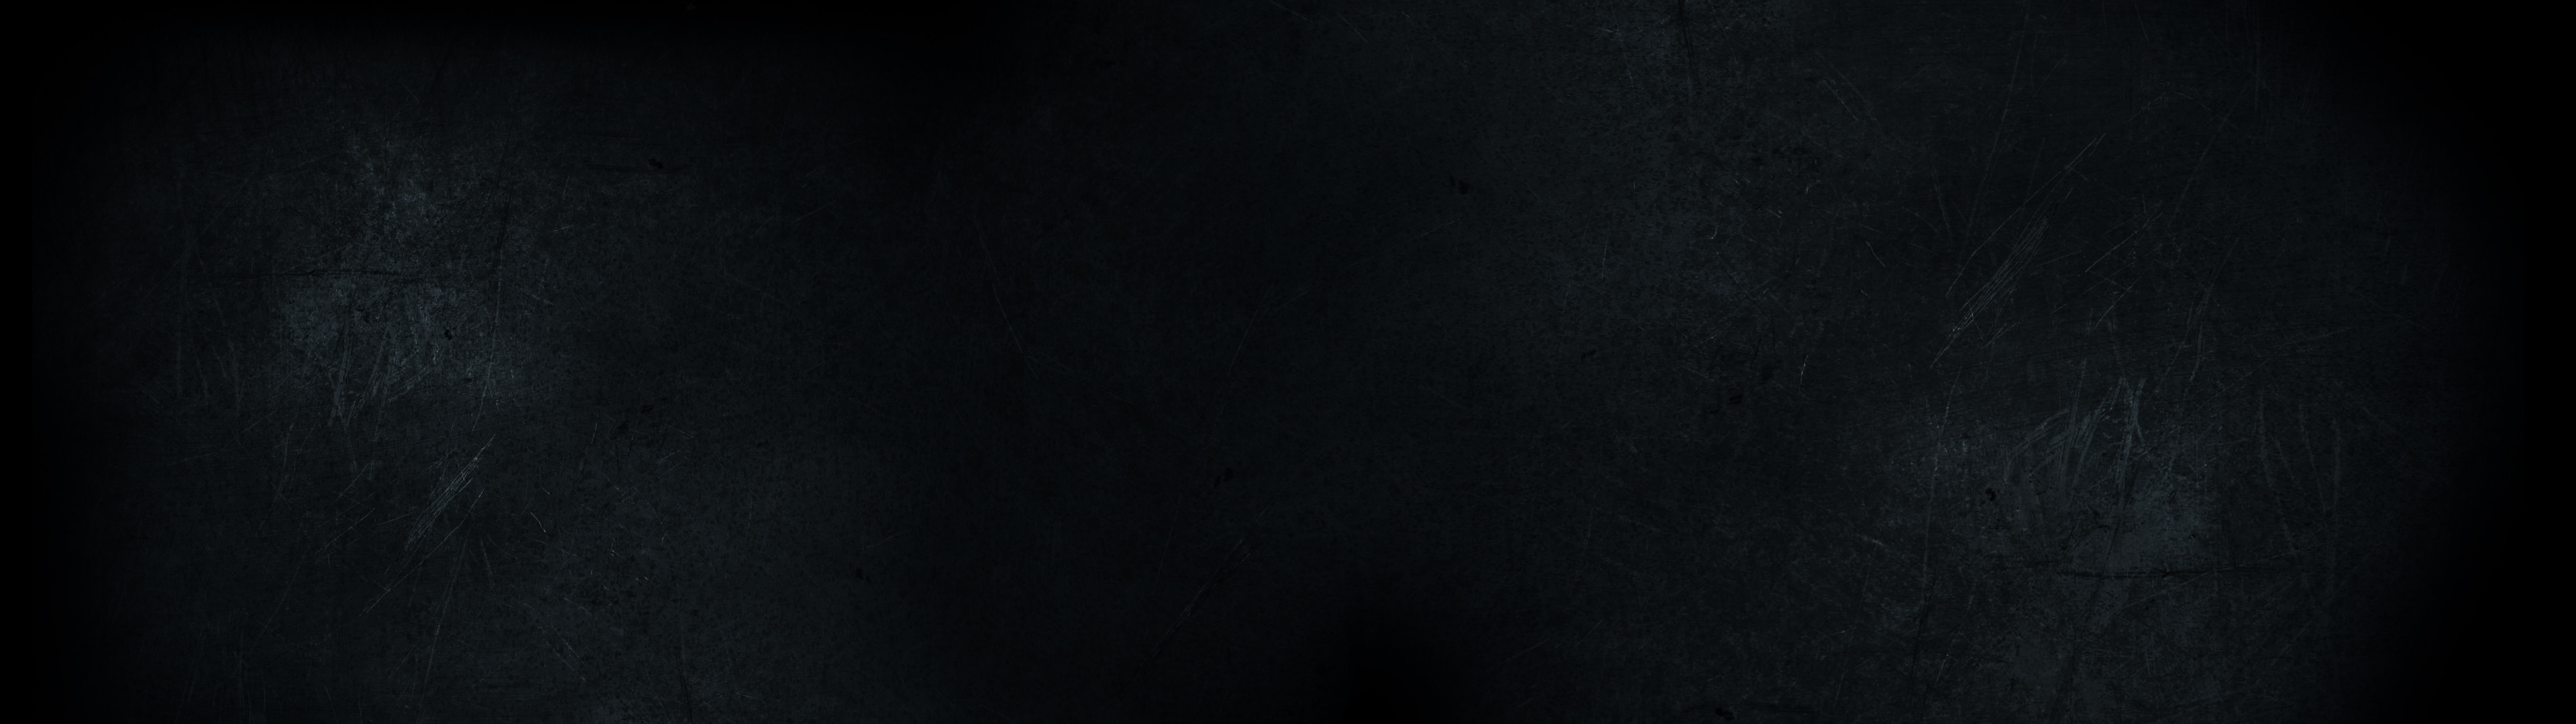 3840x1080 ... Minimalist Metal Wallpaper (dual screen edition) by malkowitch